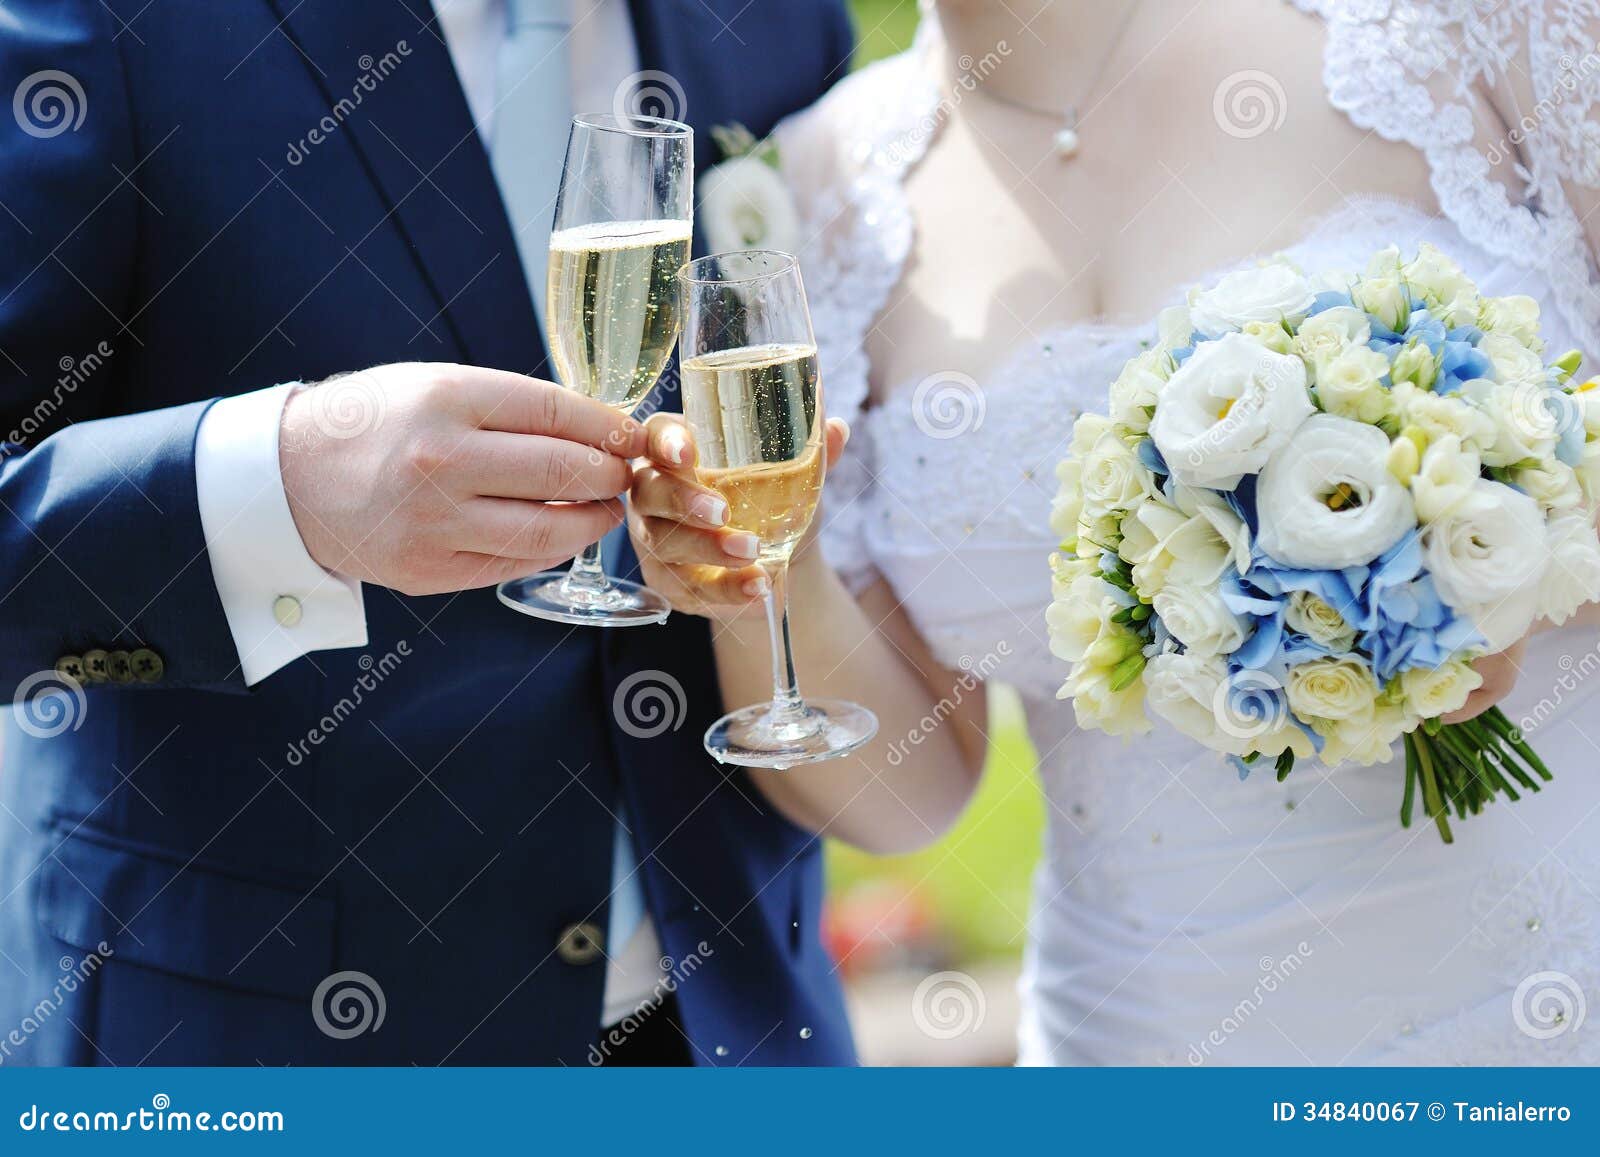 Bride And Groom Making A Toast With Champagne Stock Image